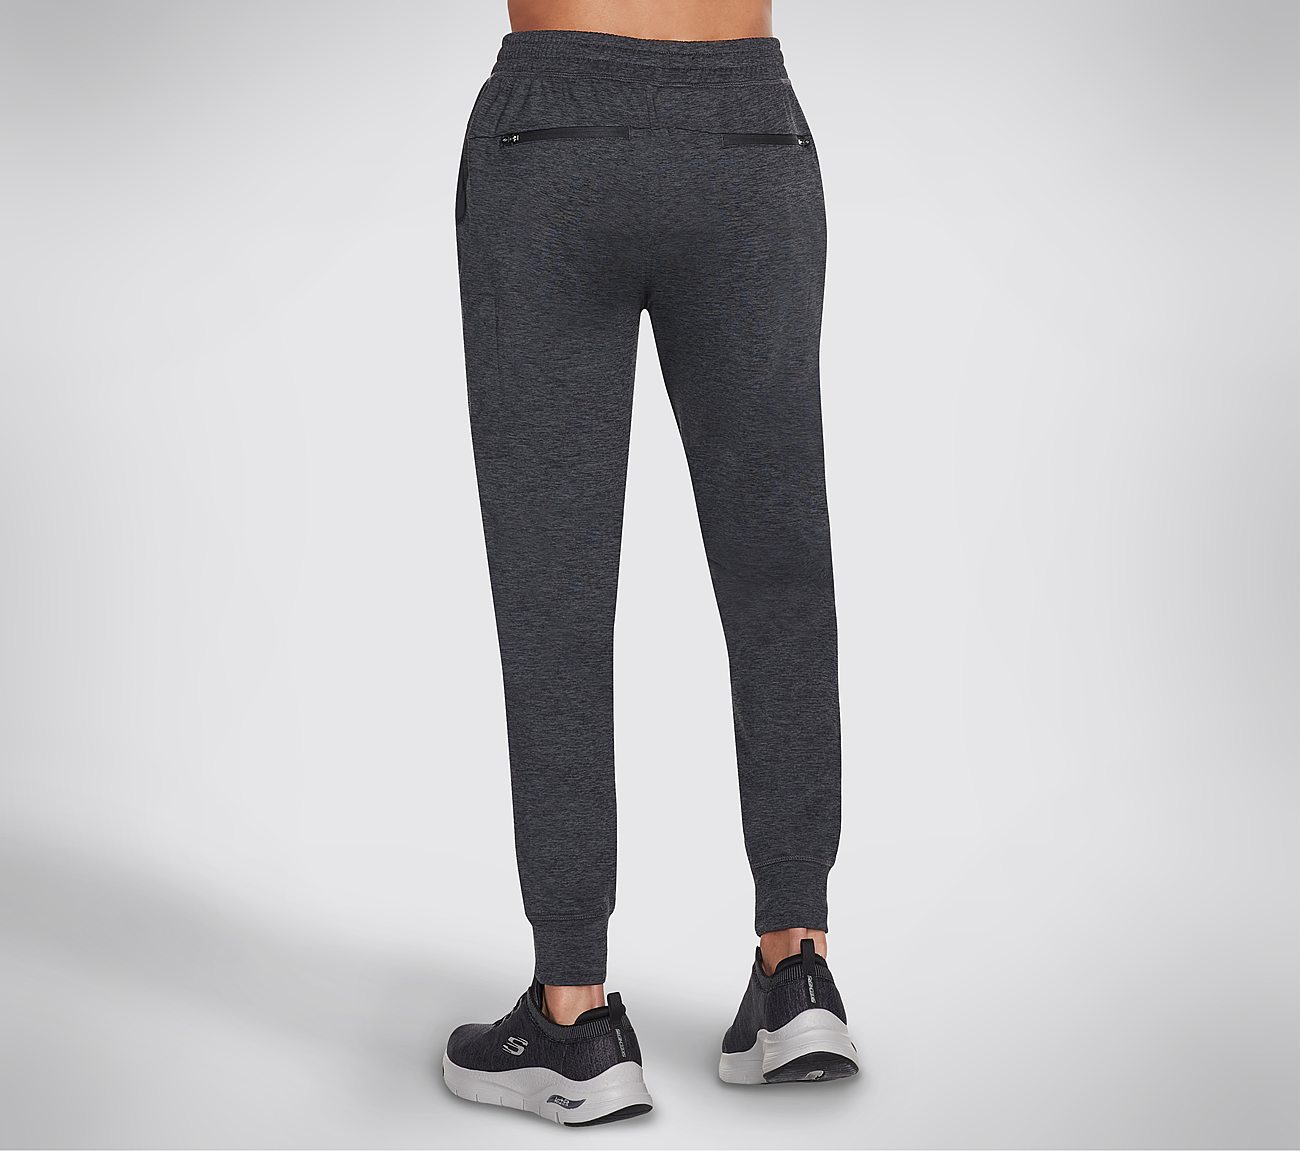 SKECH-KNITS ULTRA GO JOGGER, CCHARCOAL Apparel Top View